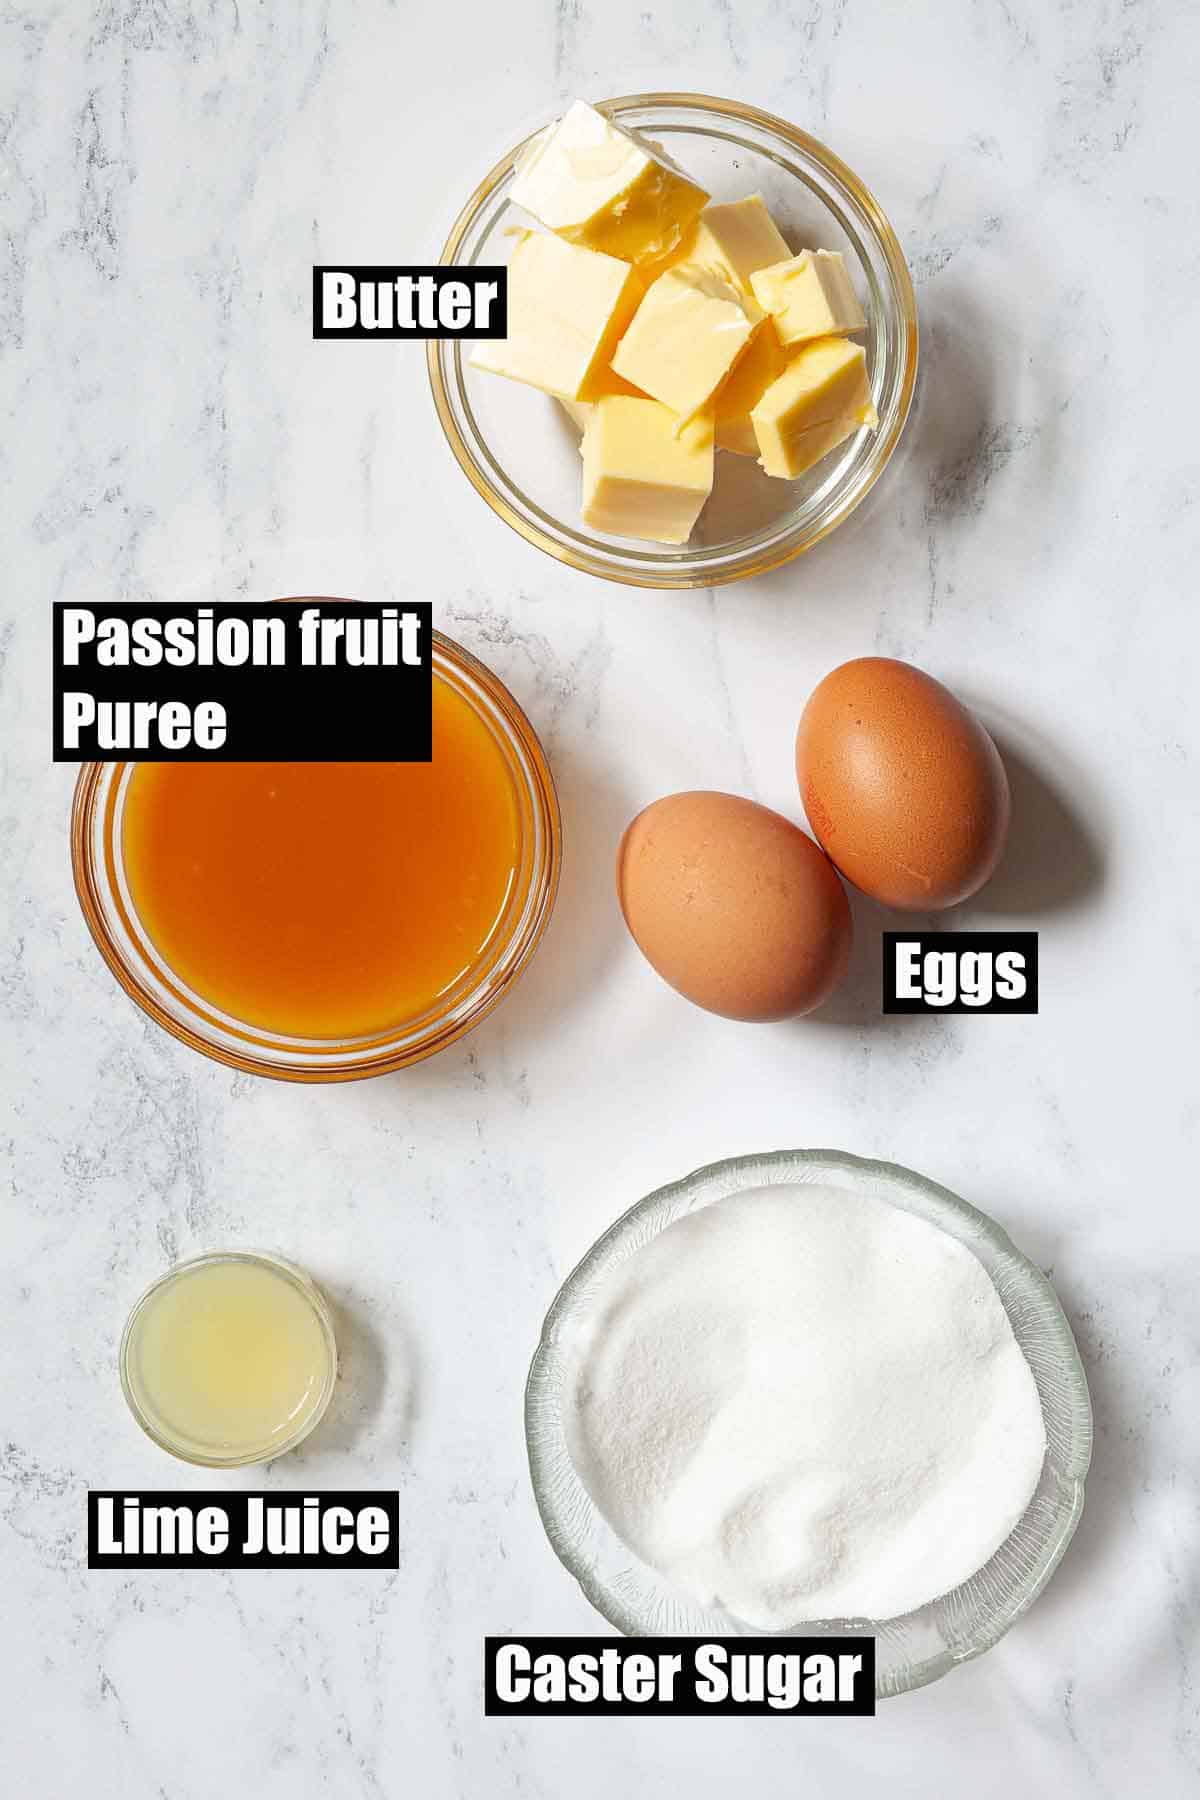 Ingredients for passionfruit butter with text overlay.